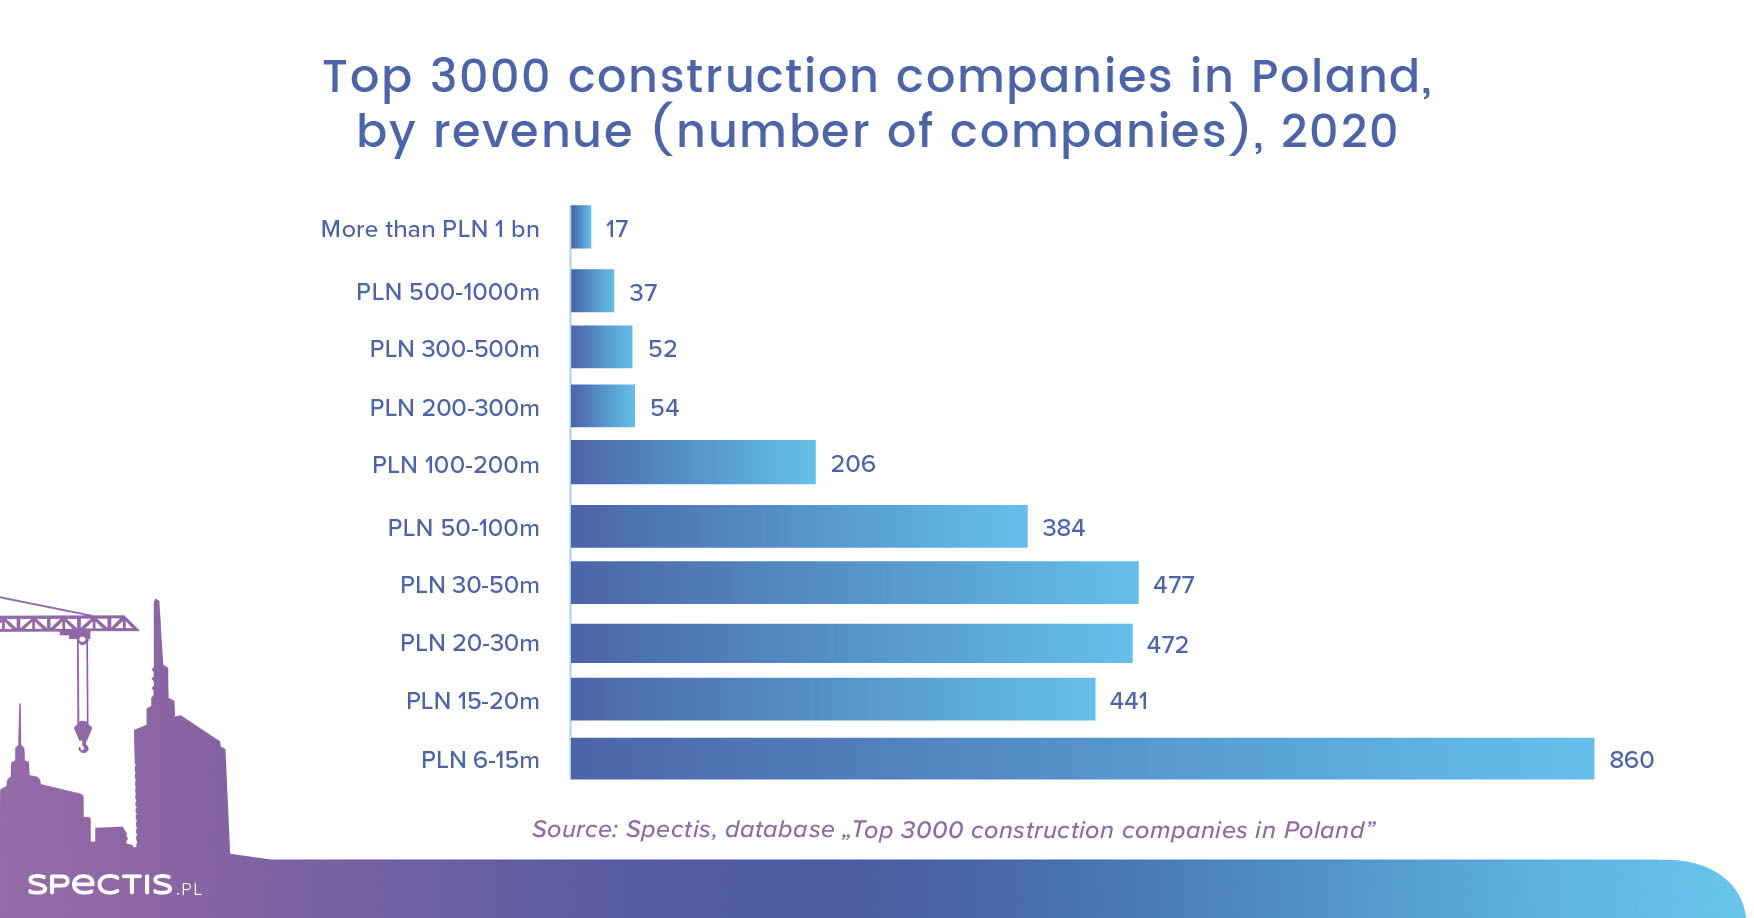 Database of top 3000 construction companies in Poland